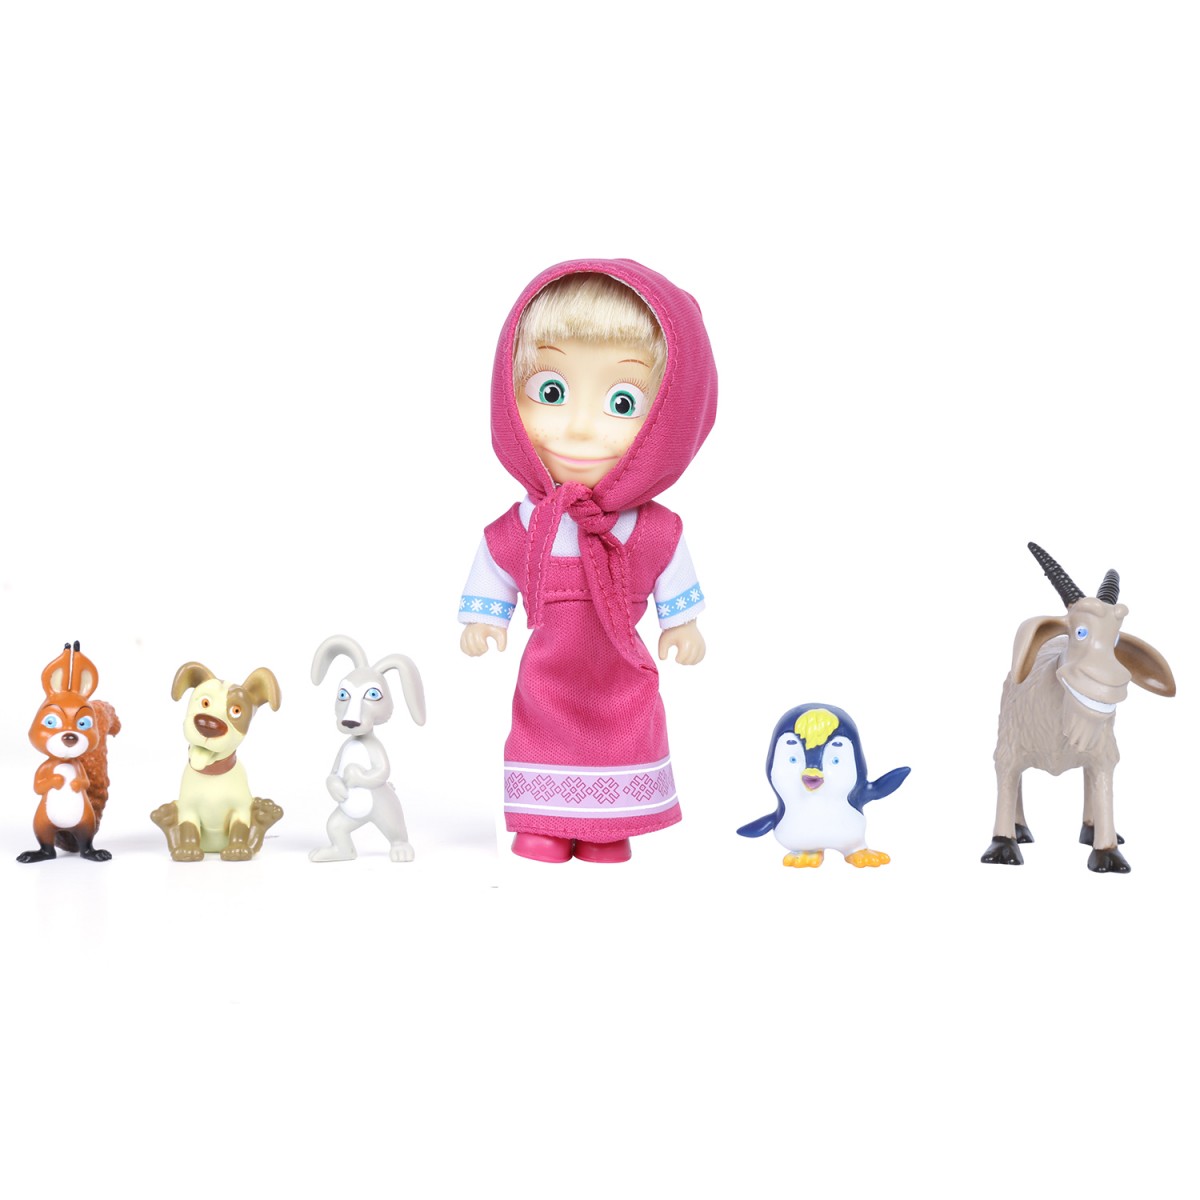 Simba Masha And Her Animal Friends Multicolour 3Y+